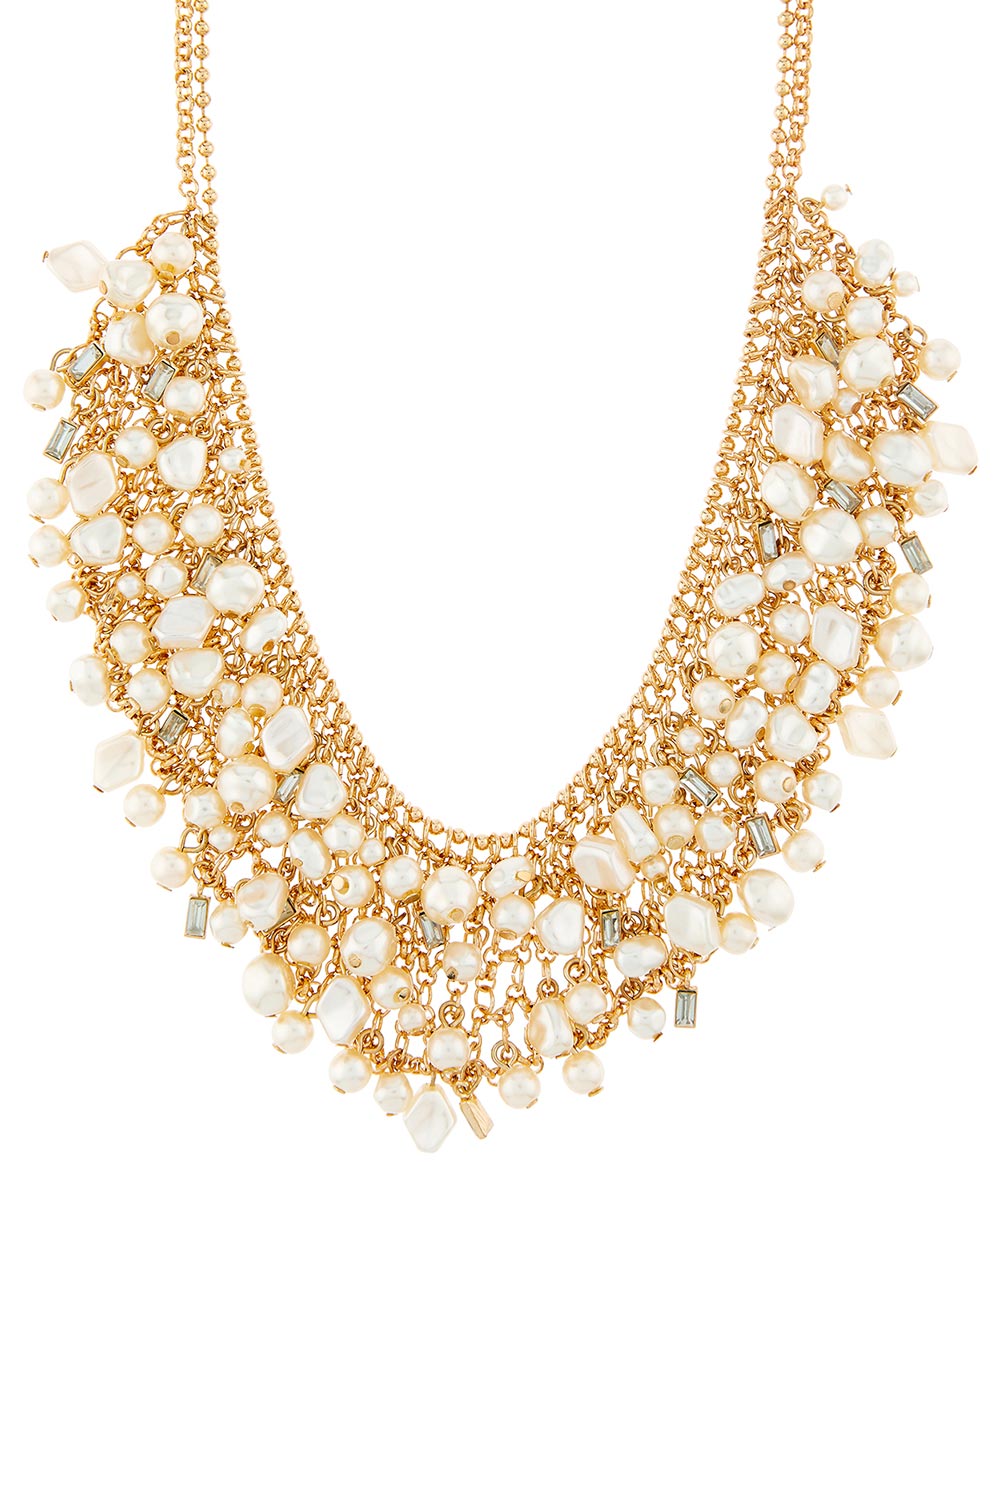 Pearl Jewellery: Shop The Best Pearl Earrings and Pearl Necklaces ...